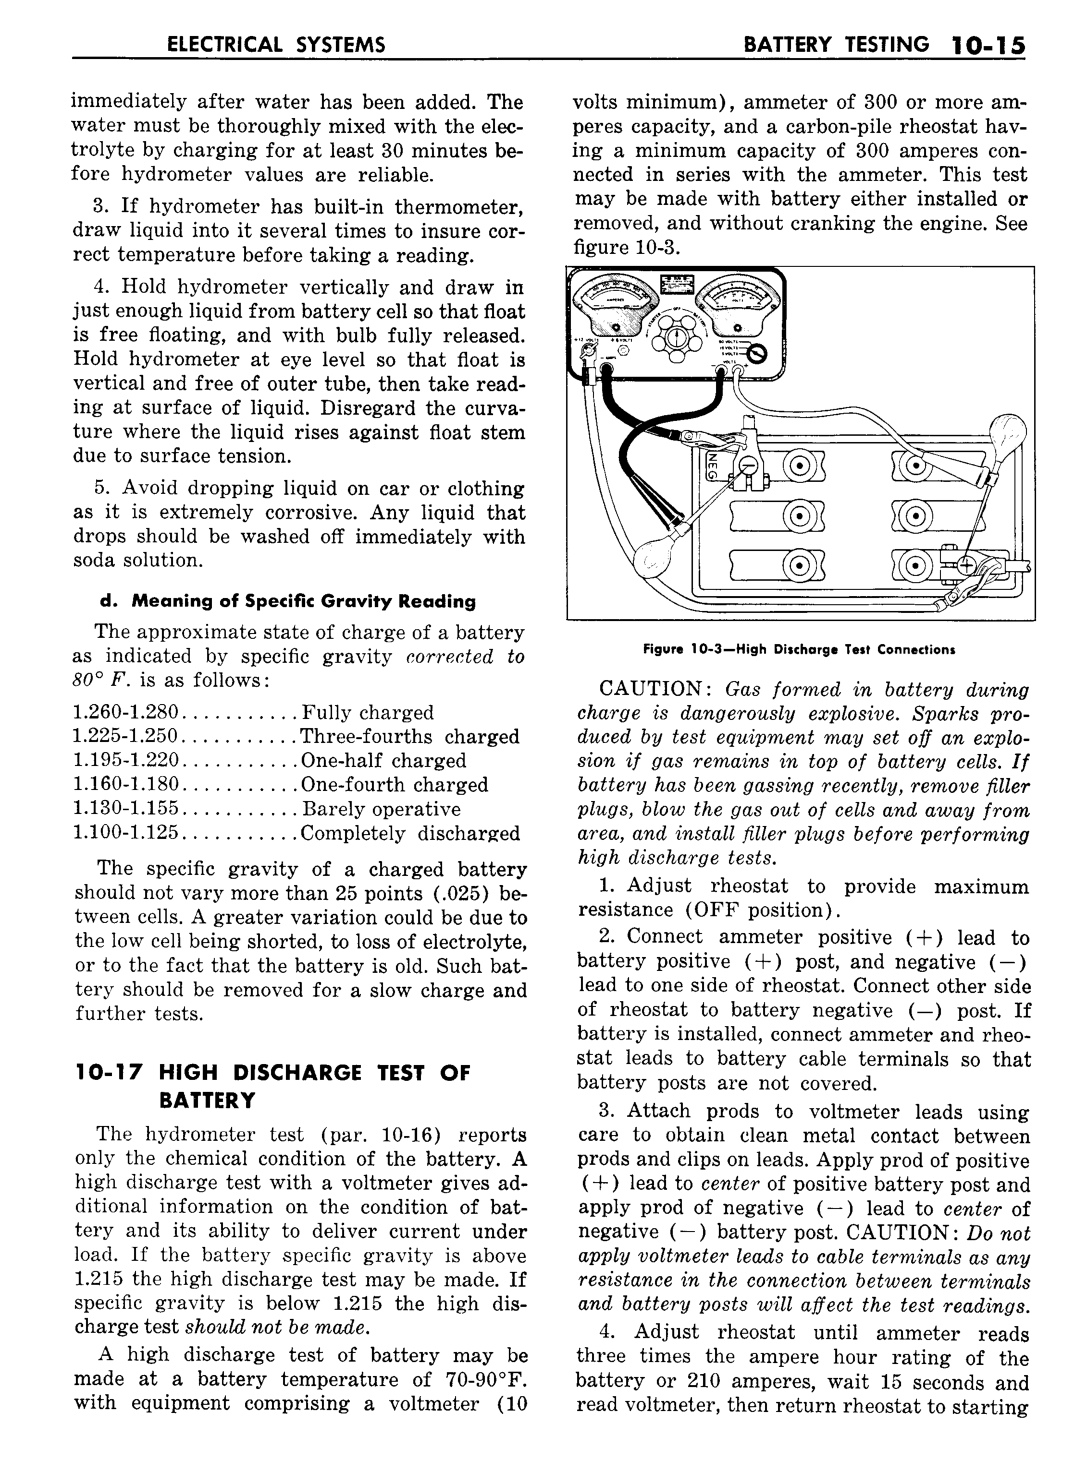 n_11 1957 Buick Shop Manual - Electrical Systems-015-015.jpg